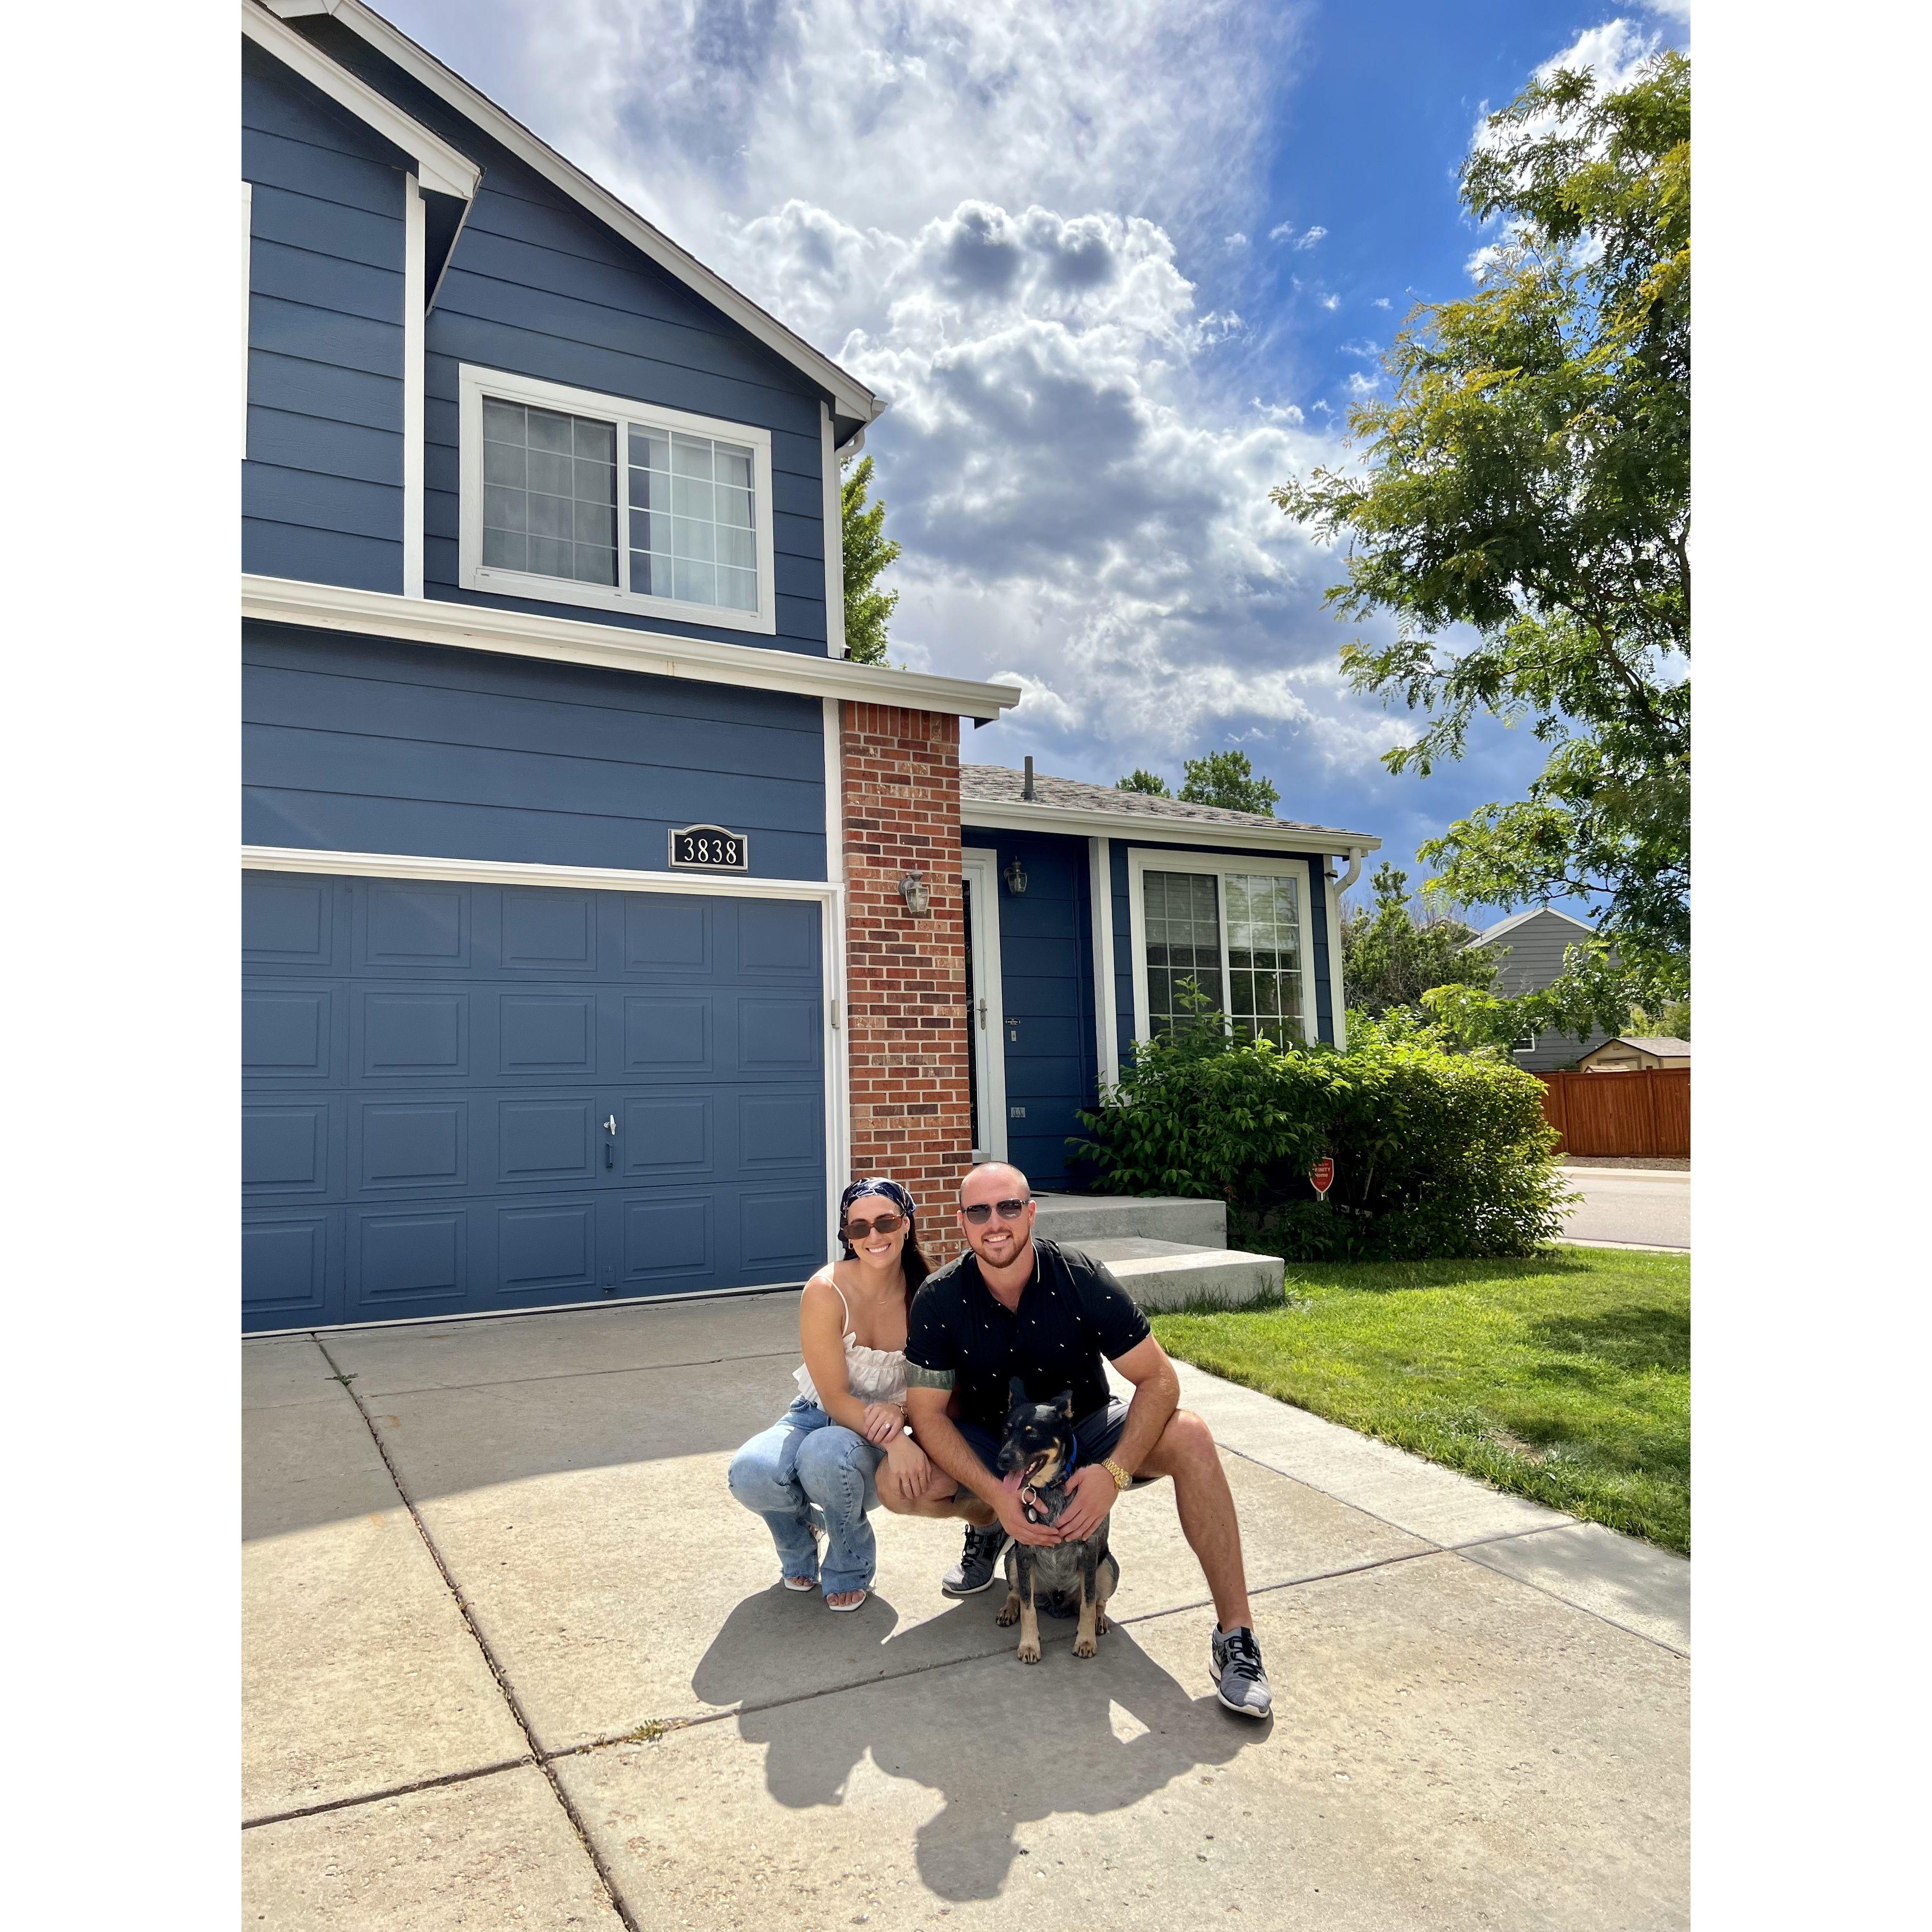 Bought our first home :)